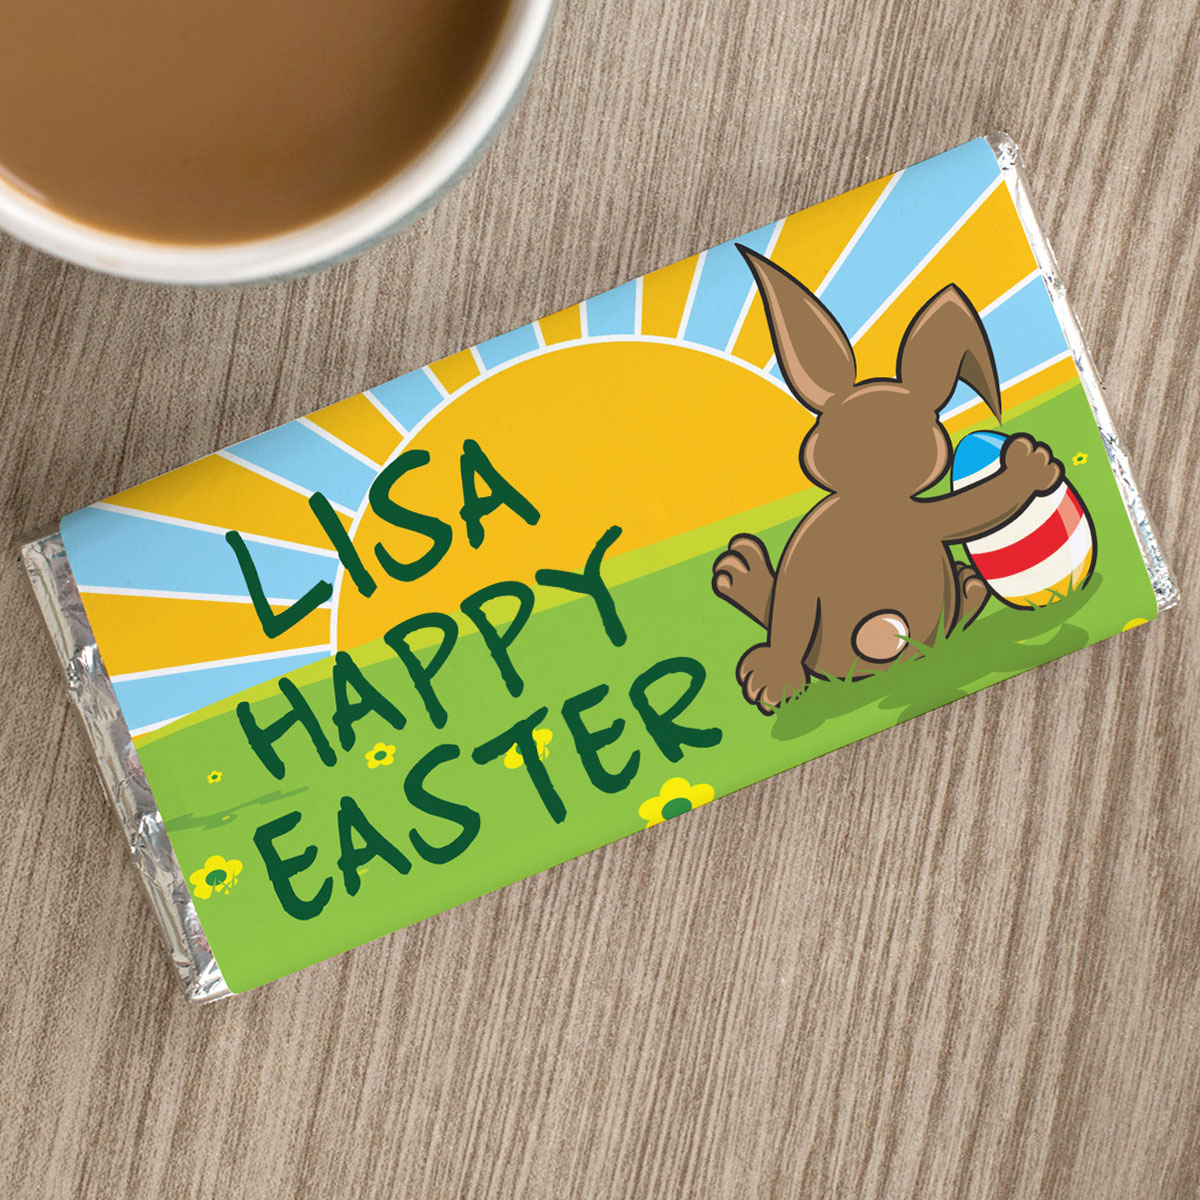 Personalised Chocolate Bar - Happy Easter Sunset